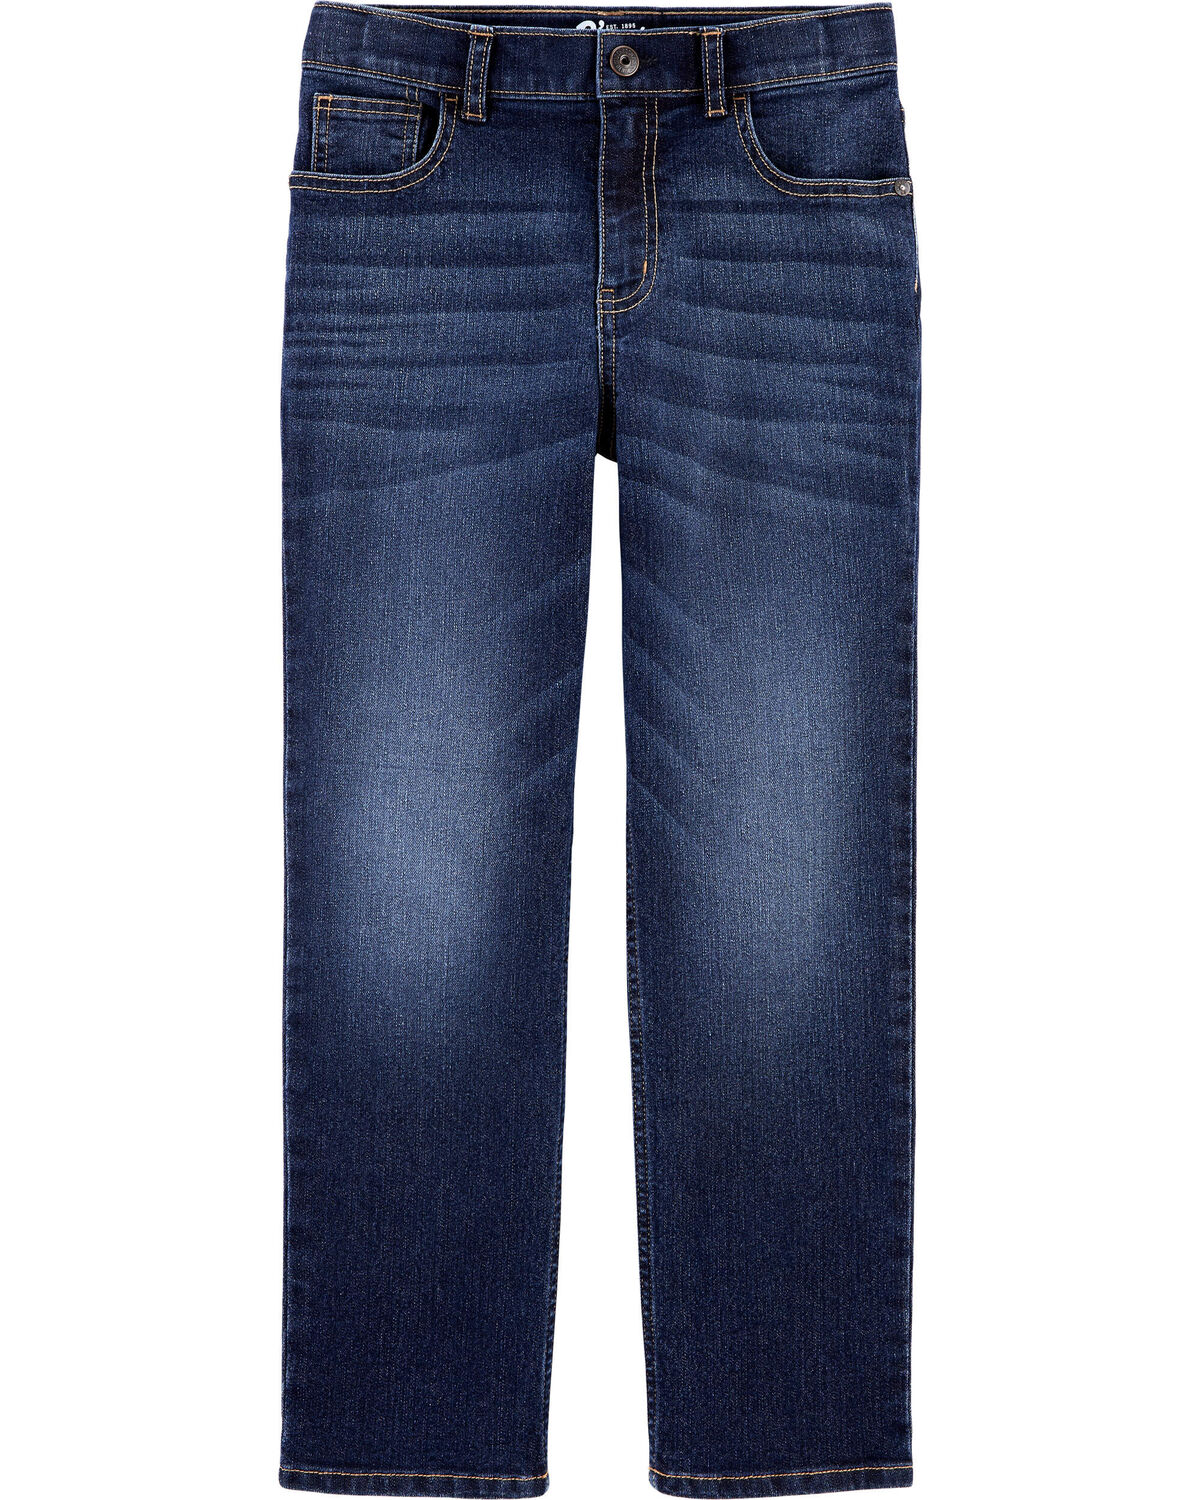 Kid Dark Wash Relaxed-Fit Classic Jeans